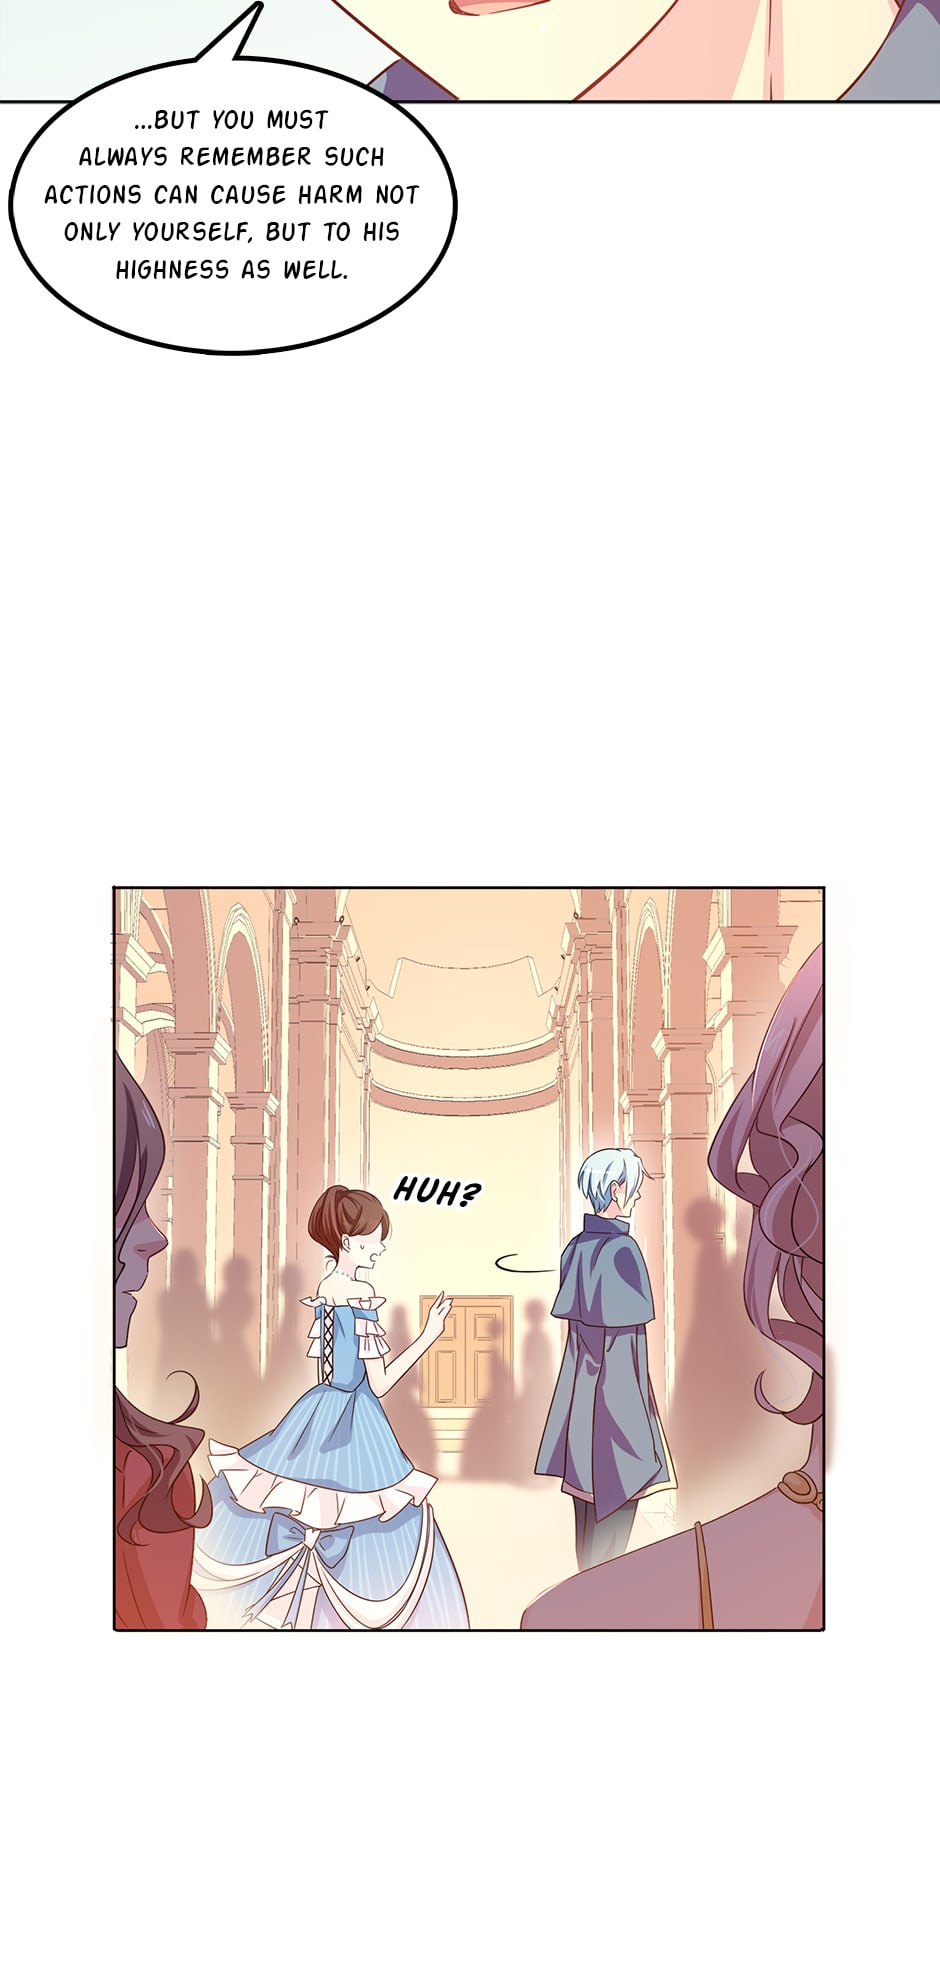 Surviving As The Prince's Fiancée - Page 2